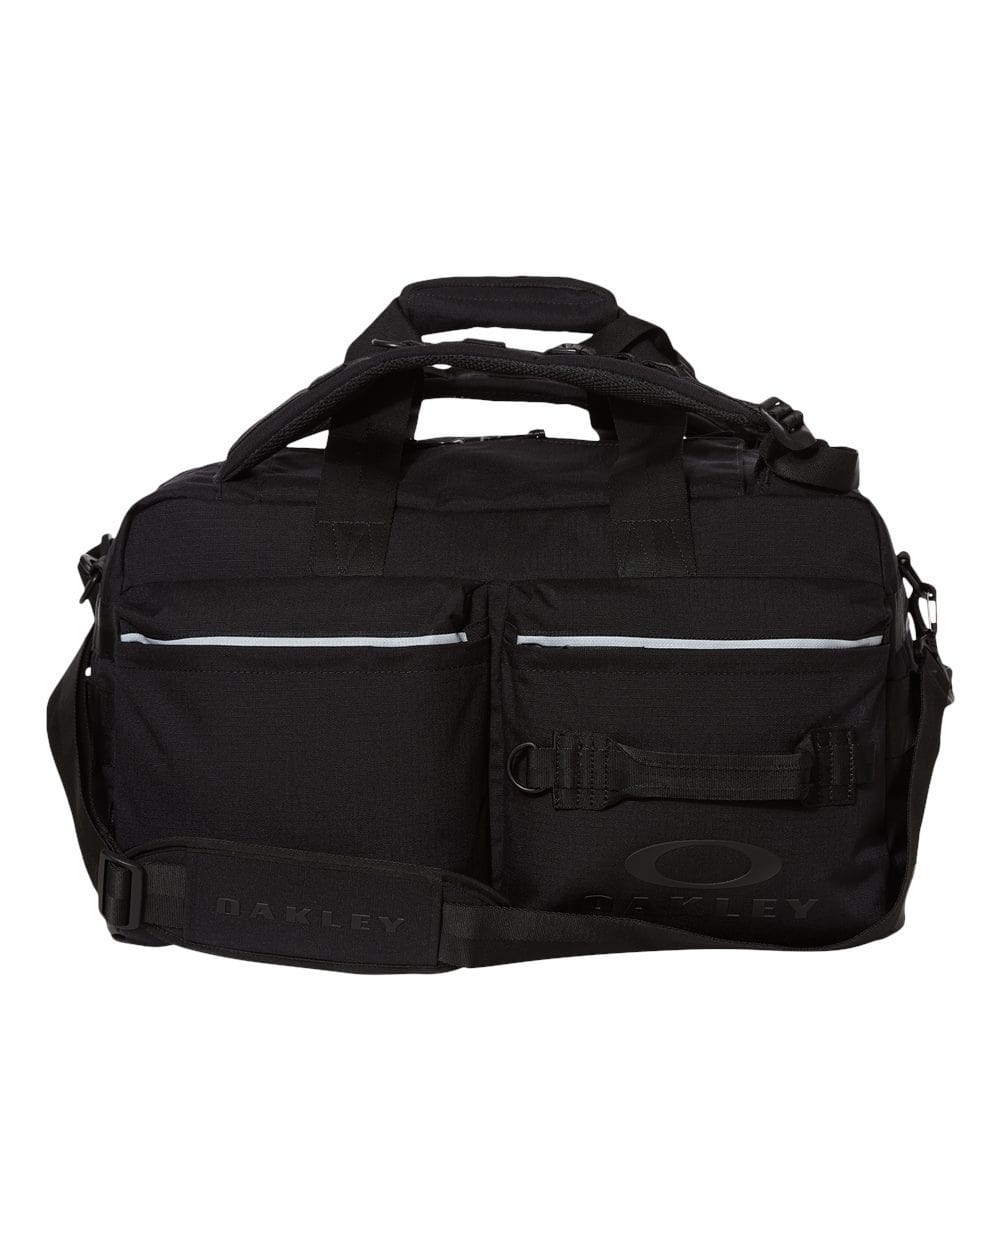 Urban Travel (Expandable) travel bags 55 L trolley 65 CM duffel air bags  Large-capacity Duffel With Wheels (Strolley) Blue - Price in India |  Flipkart.com